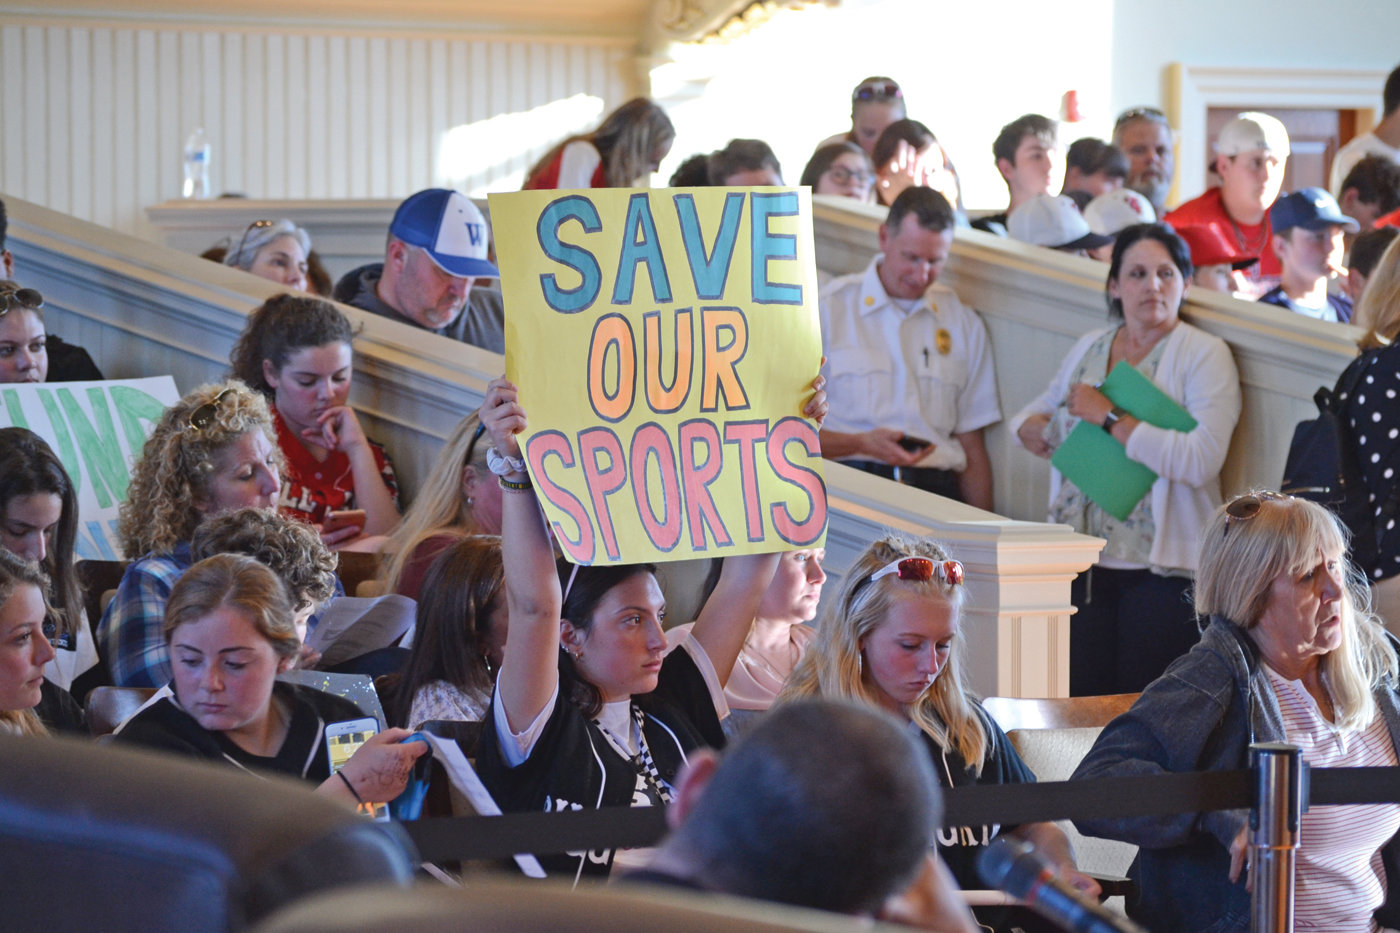 A Warwick student holds up a protest sign during a meeting of the Warwick City Council last month.